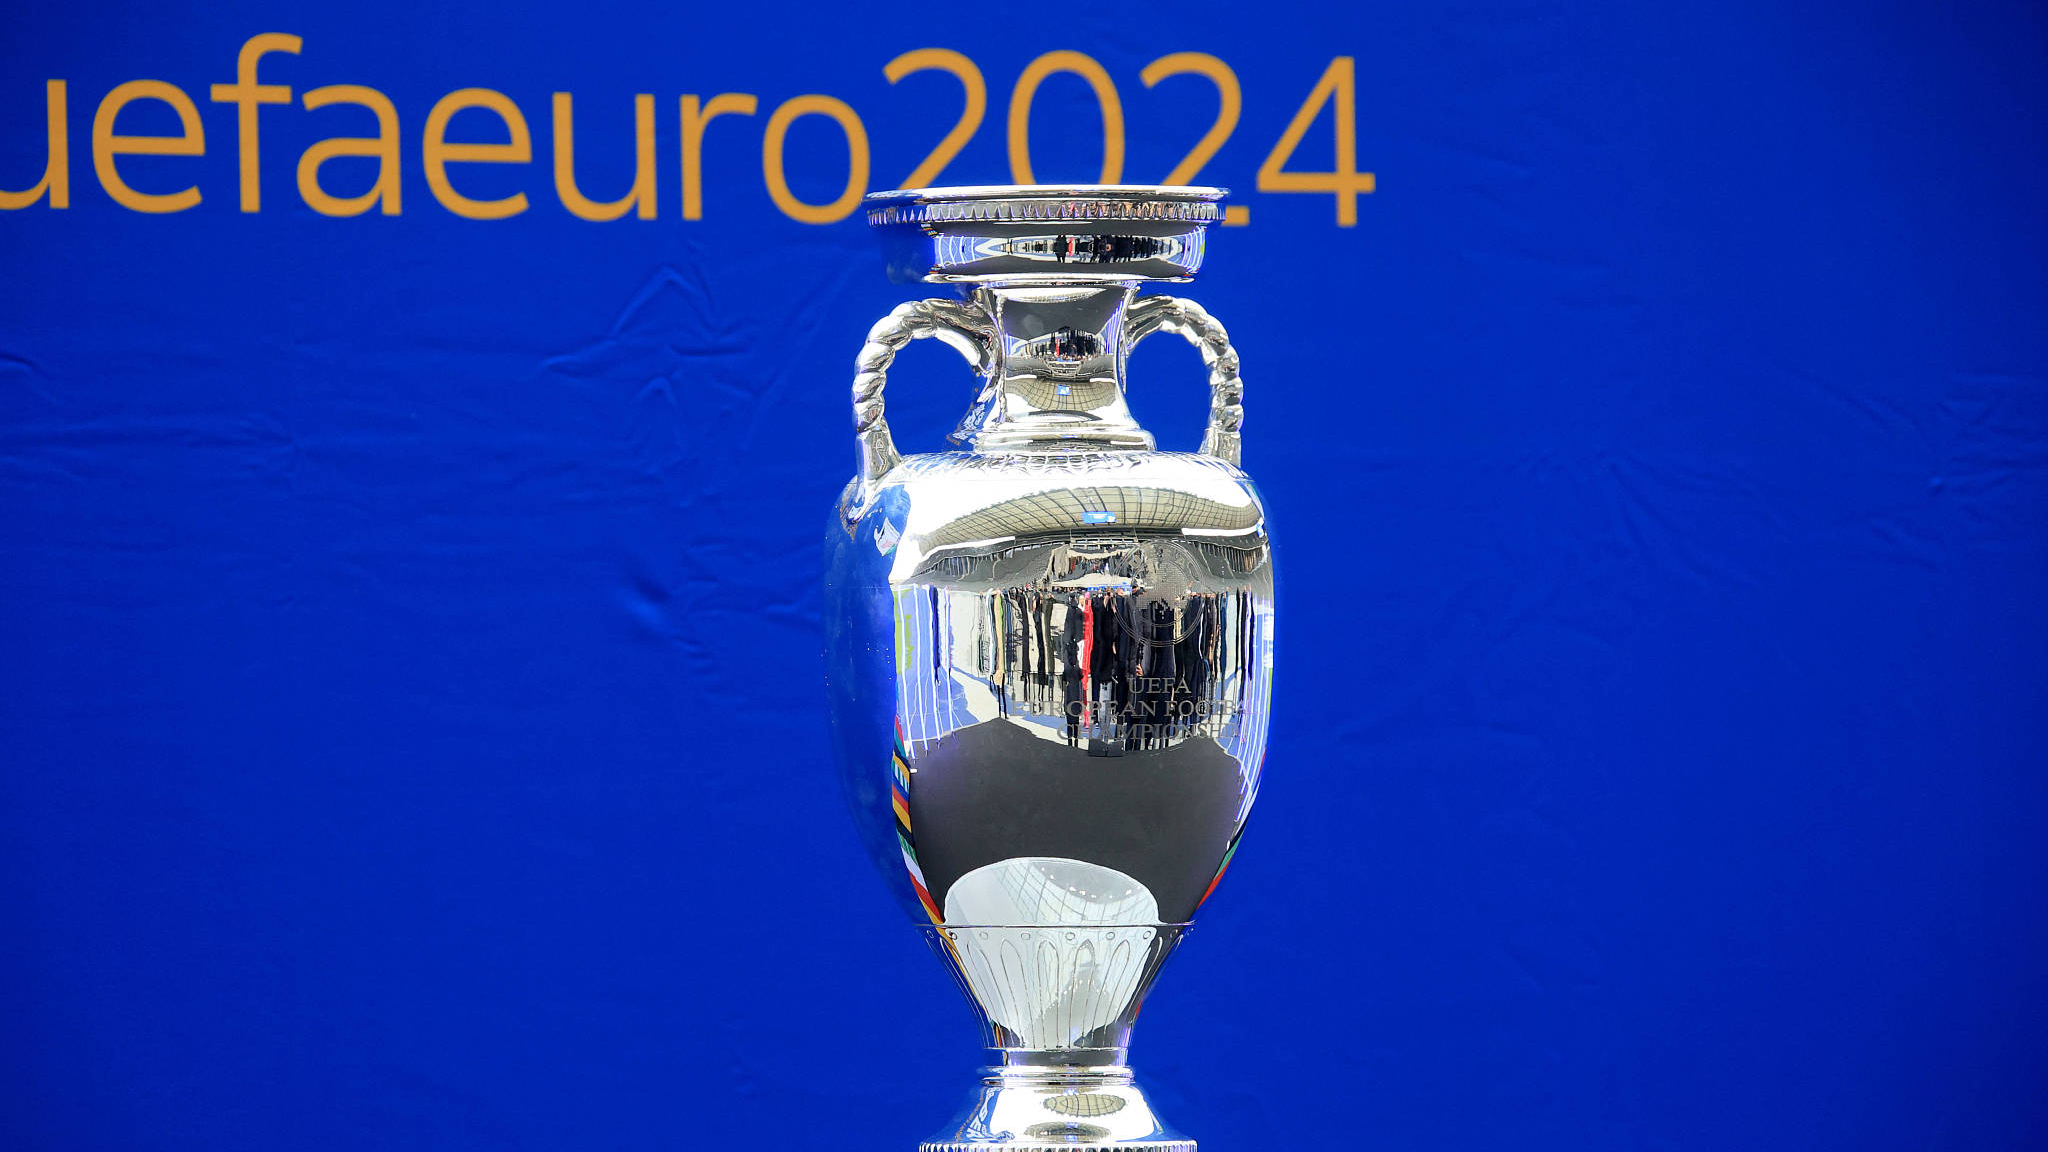 File photo of Euro 2024 trophy. /CFP